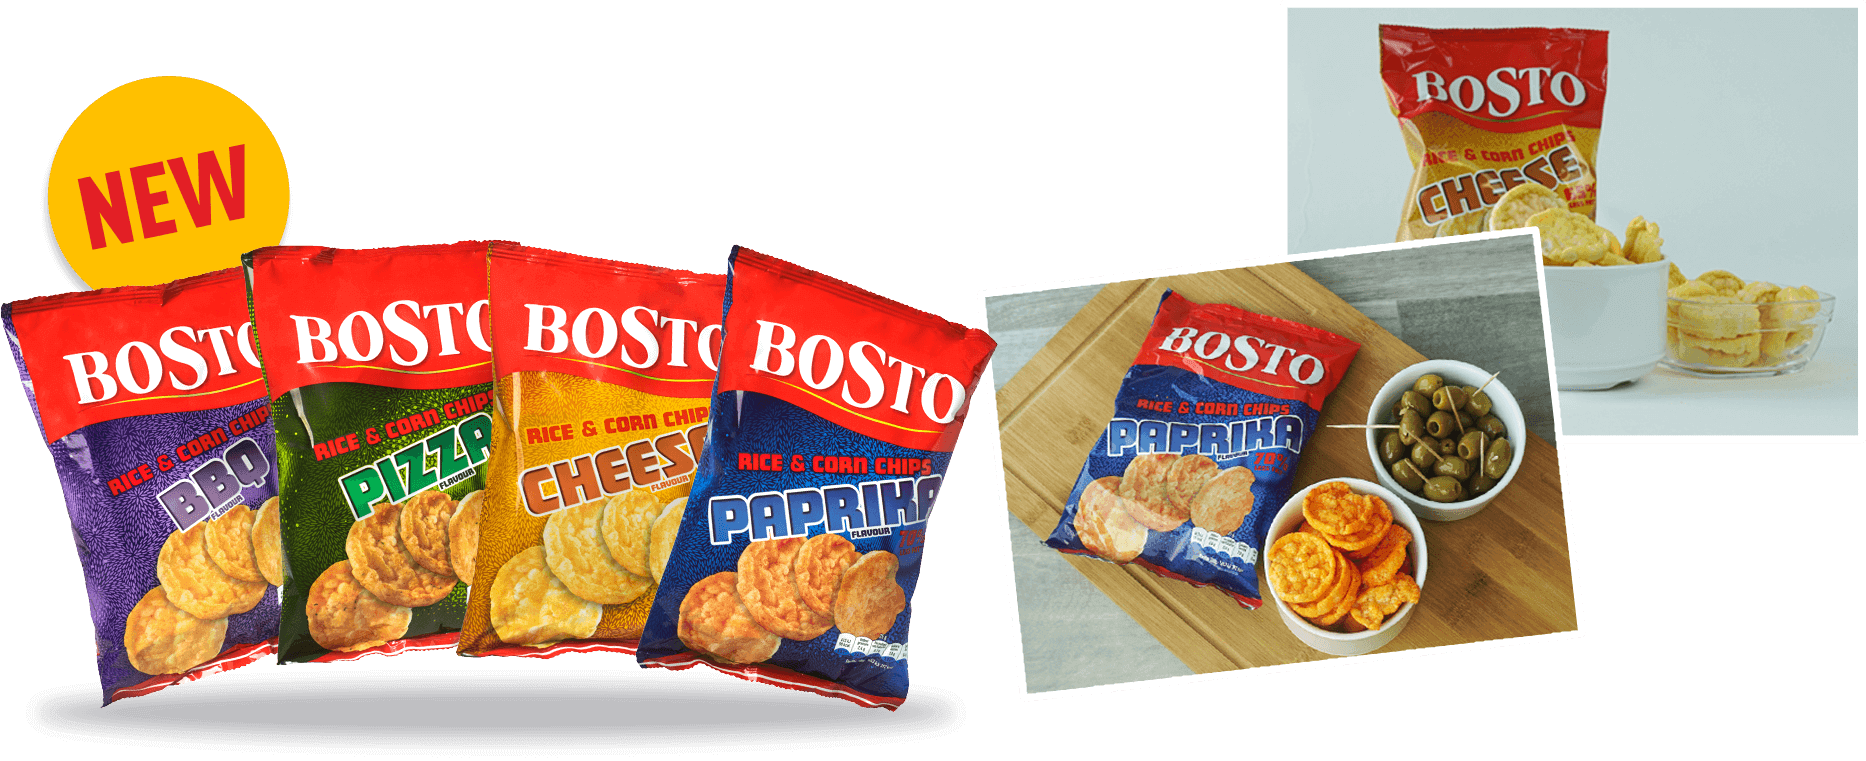 Bosto - coupon chips, paprika, cheese, BBQ, pizza